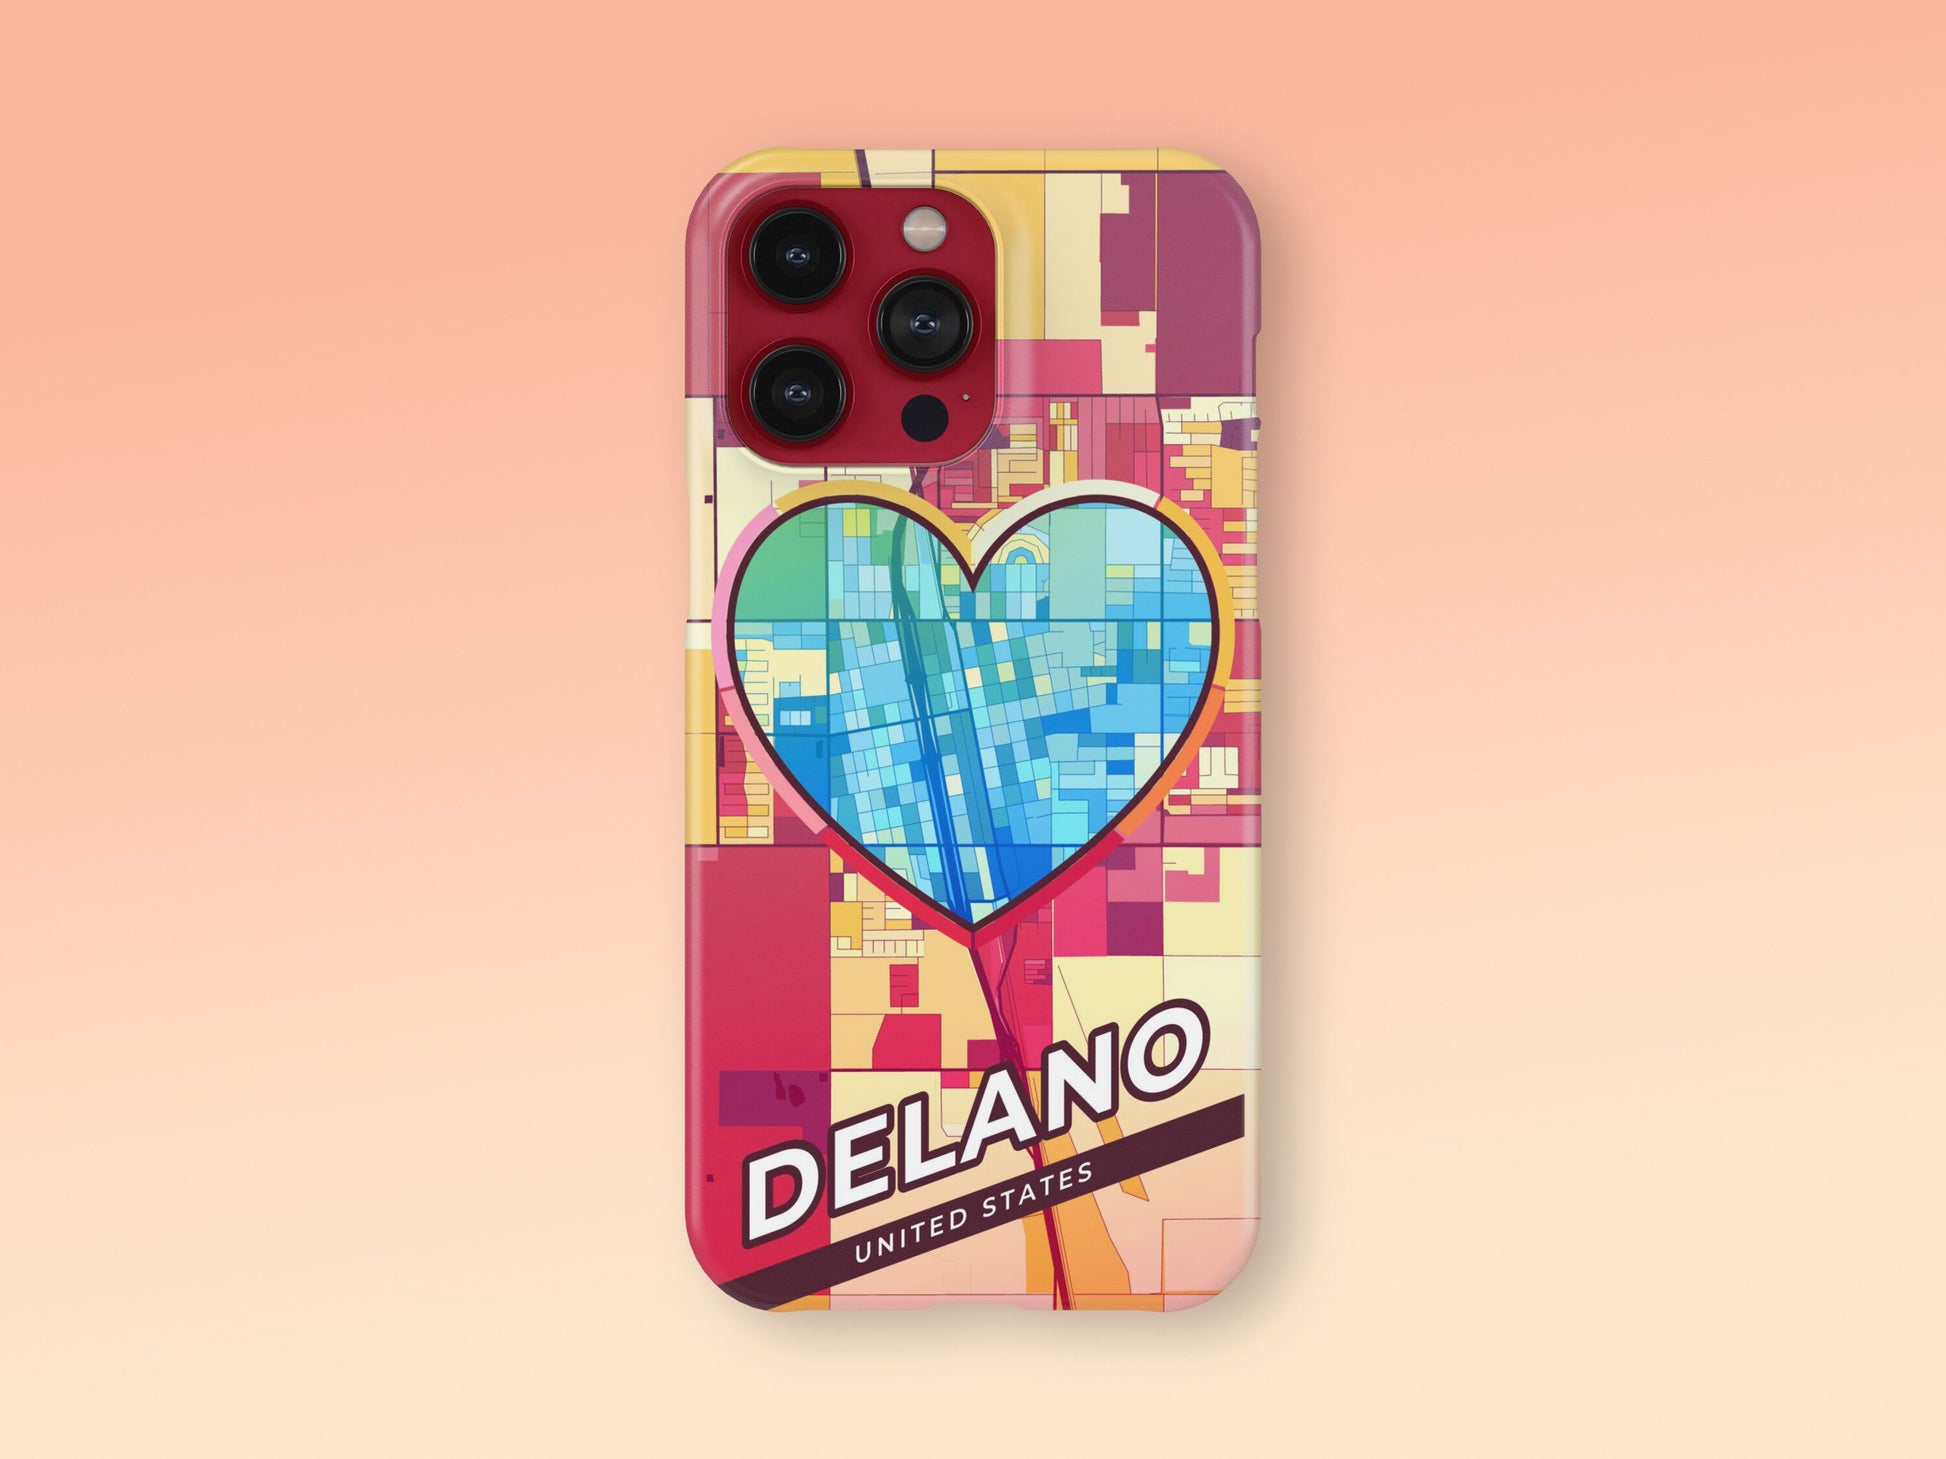 Delano California slim phone case with colorful icon. Birthday, wedding or housewarming gift. Couple match cases. 2